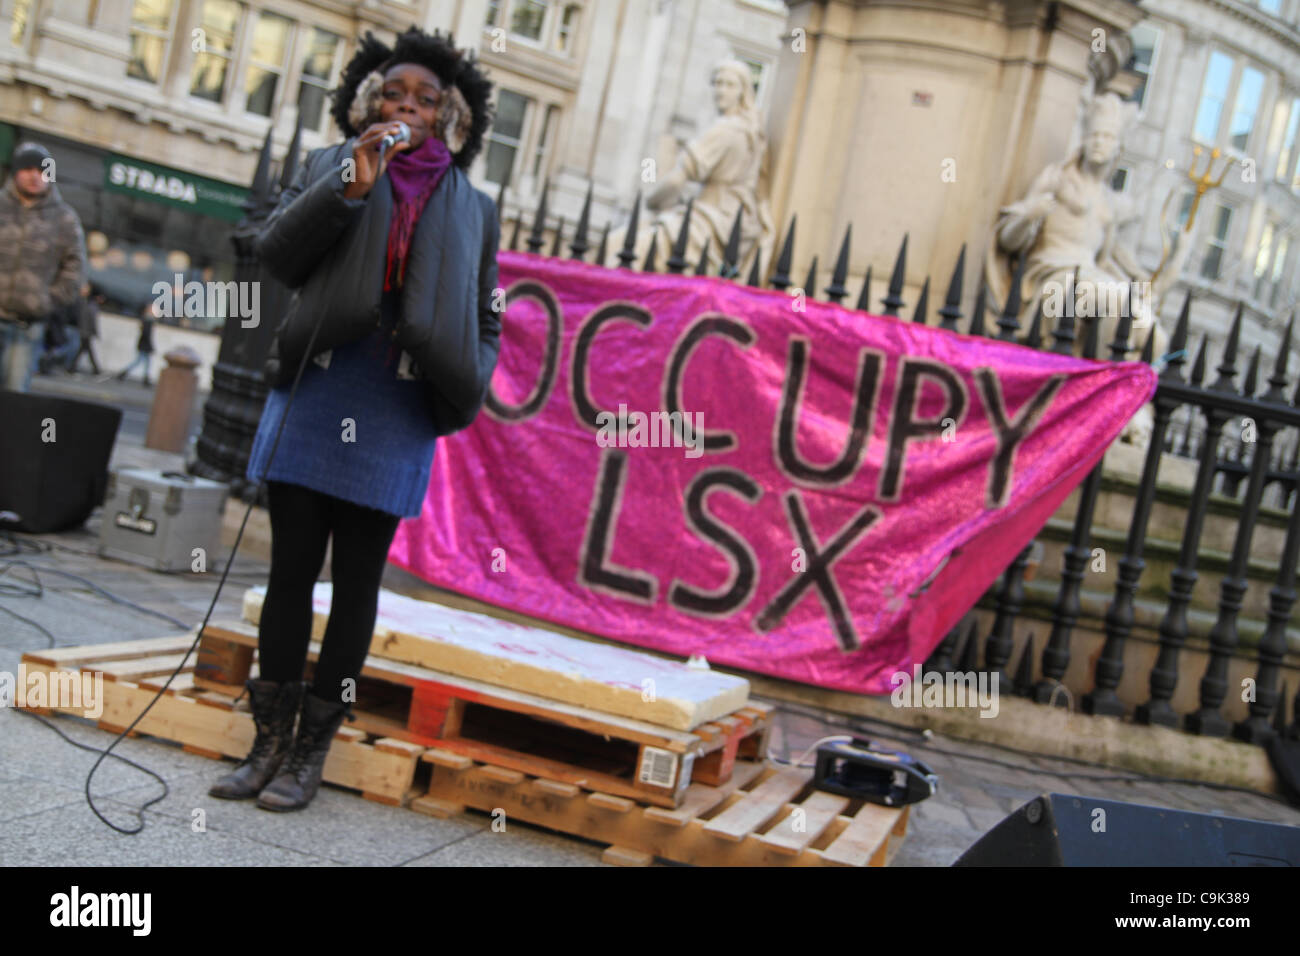 Baby Sol from the uprise anti-racism festival sings 'She Cries' at the steps of St Paul's London. Occupy London celebrate Martin Luther King Jr on the steps of St Paul's in London Stock Photo